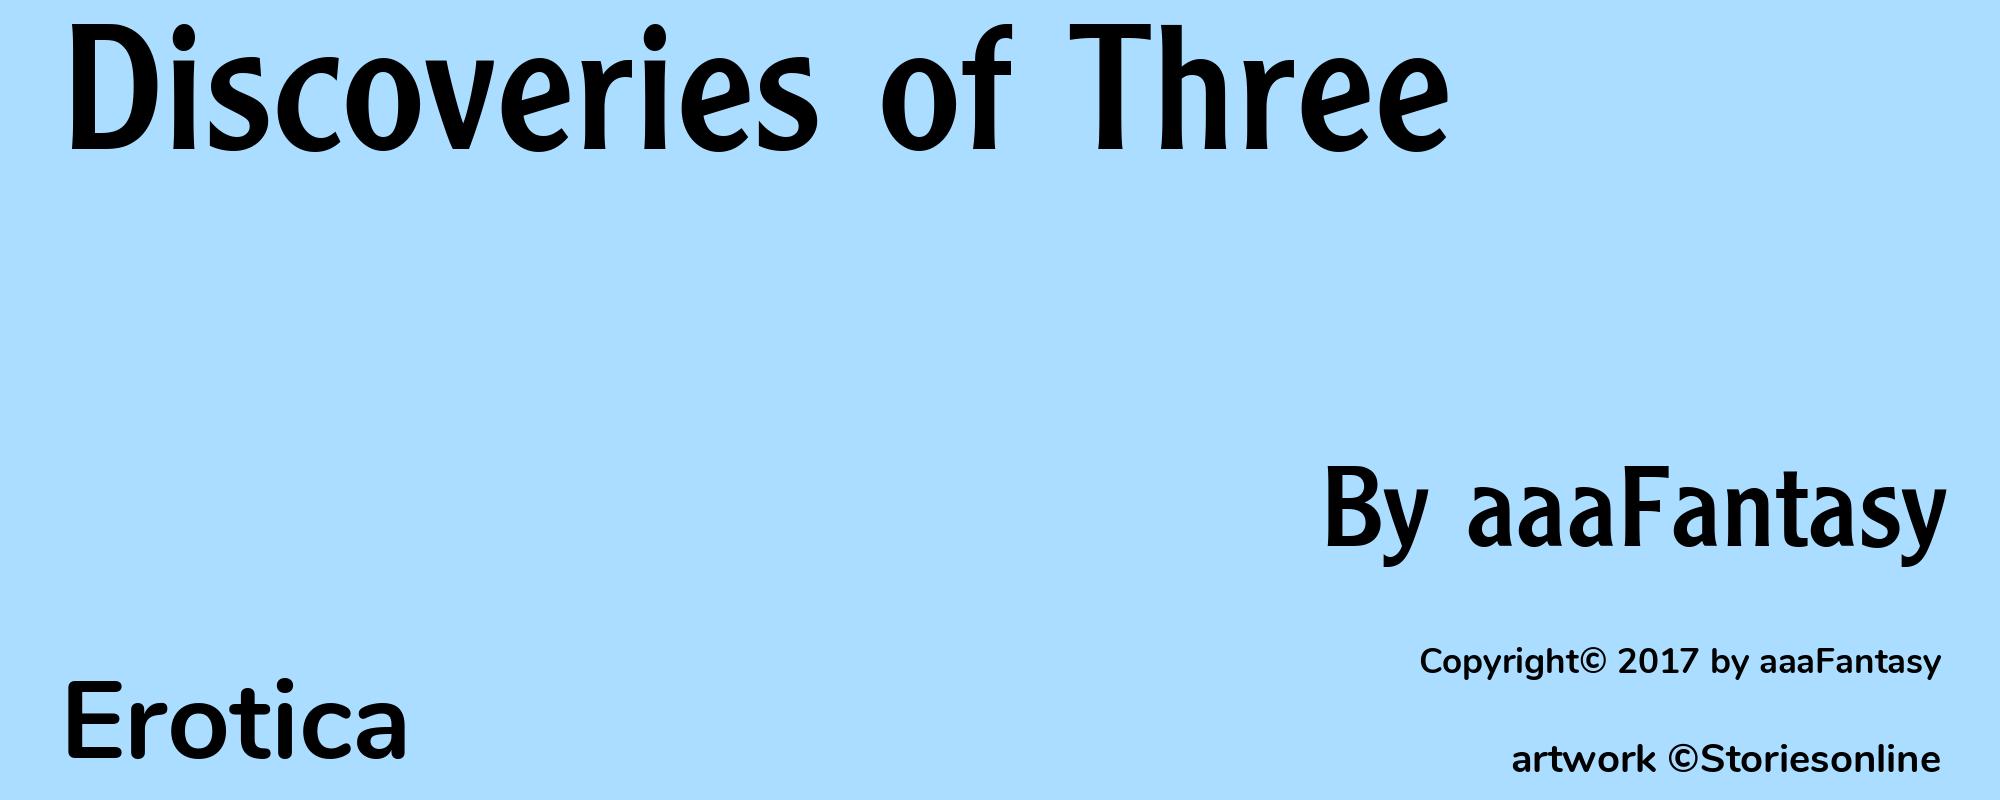 Discoveries of Three - Cover